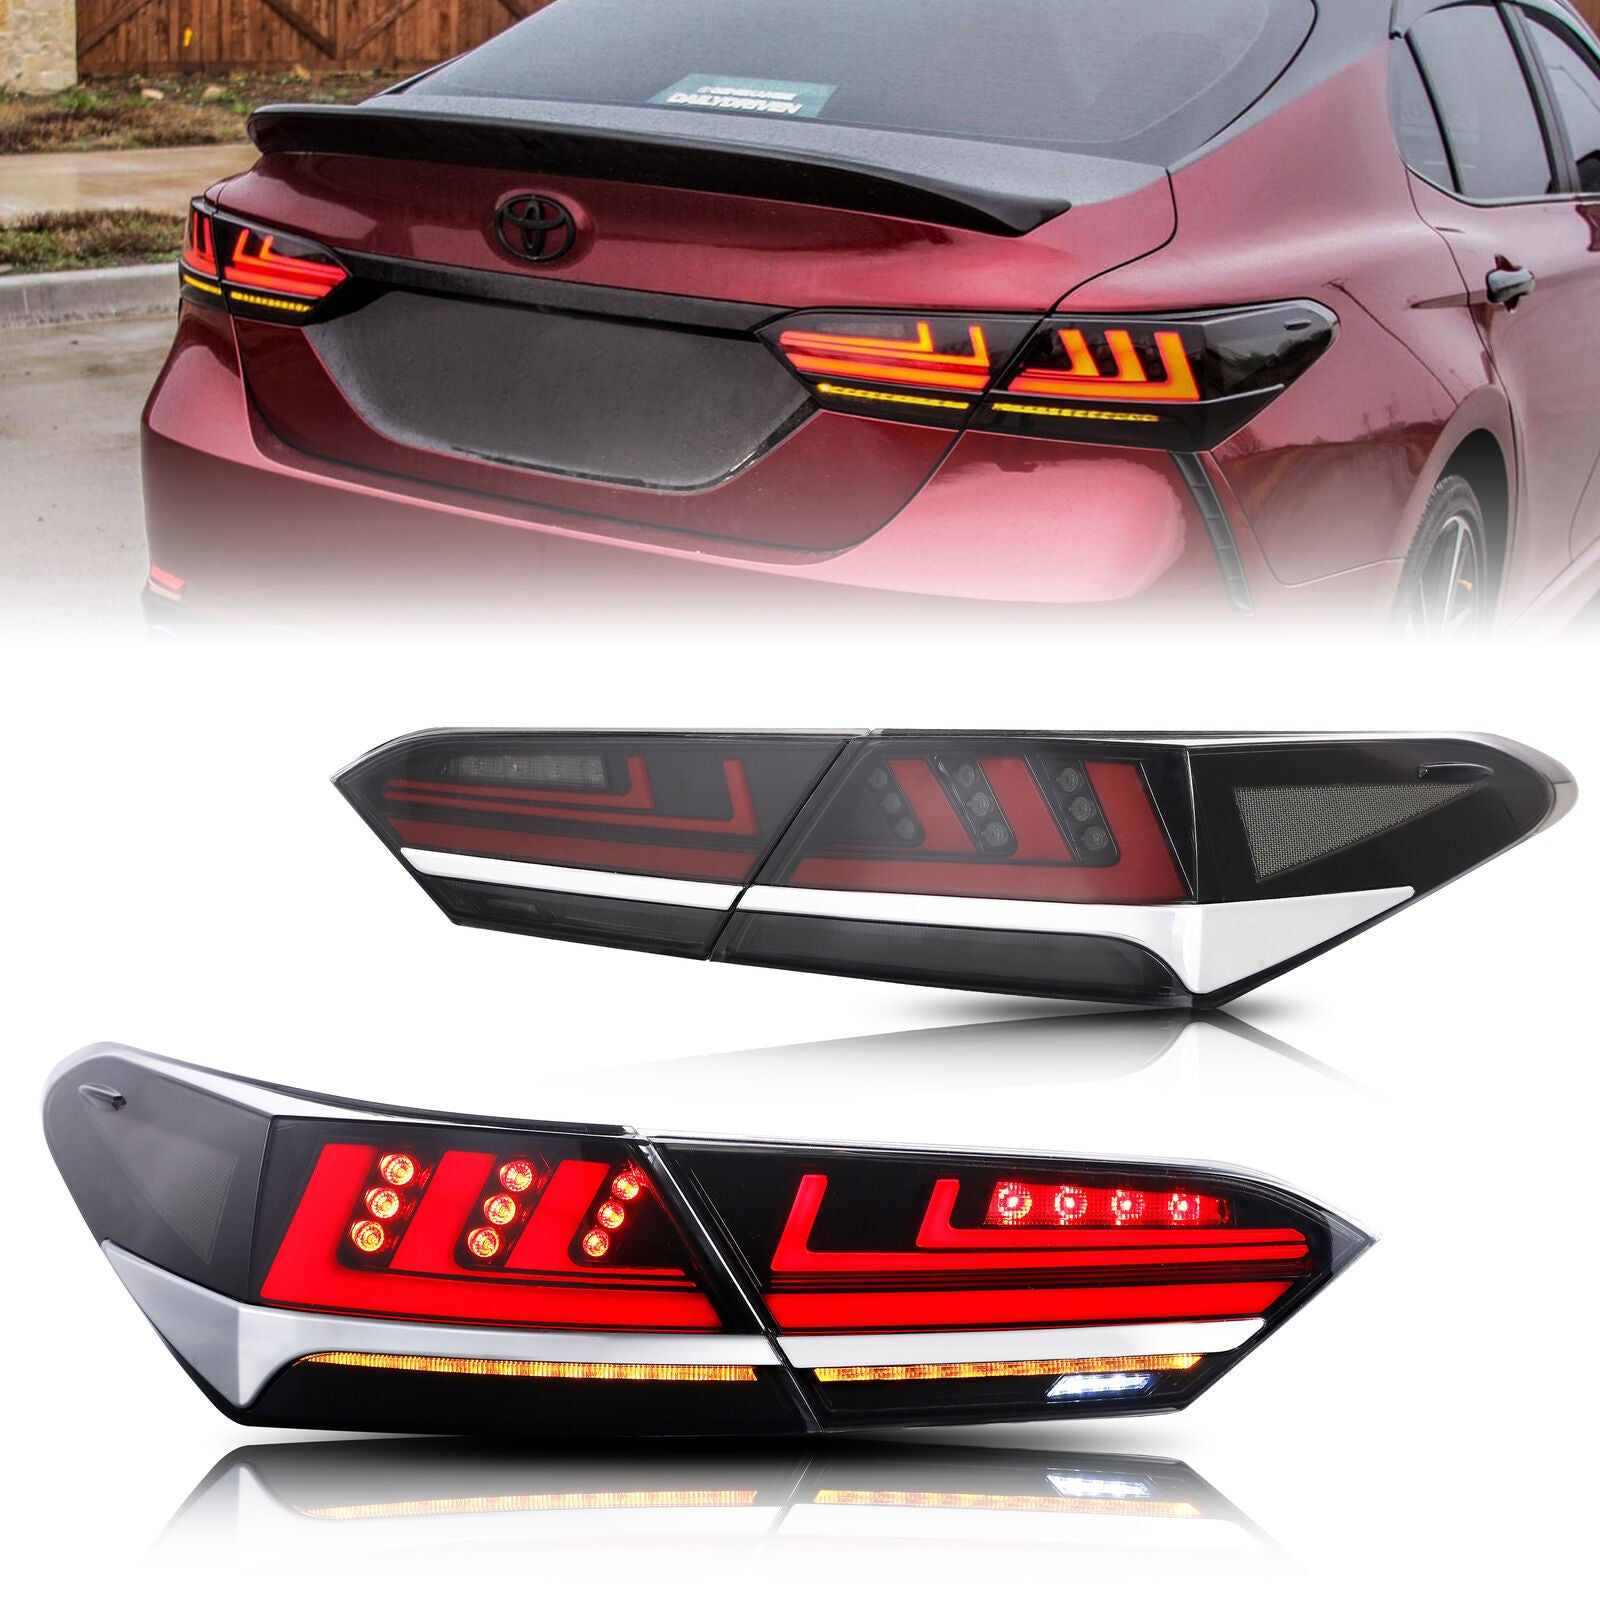 inginuity time LED Lexus Tail Lights for Toyota Camry 2018 2019